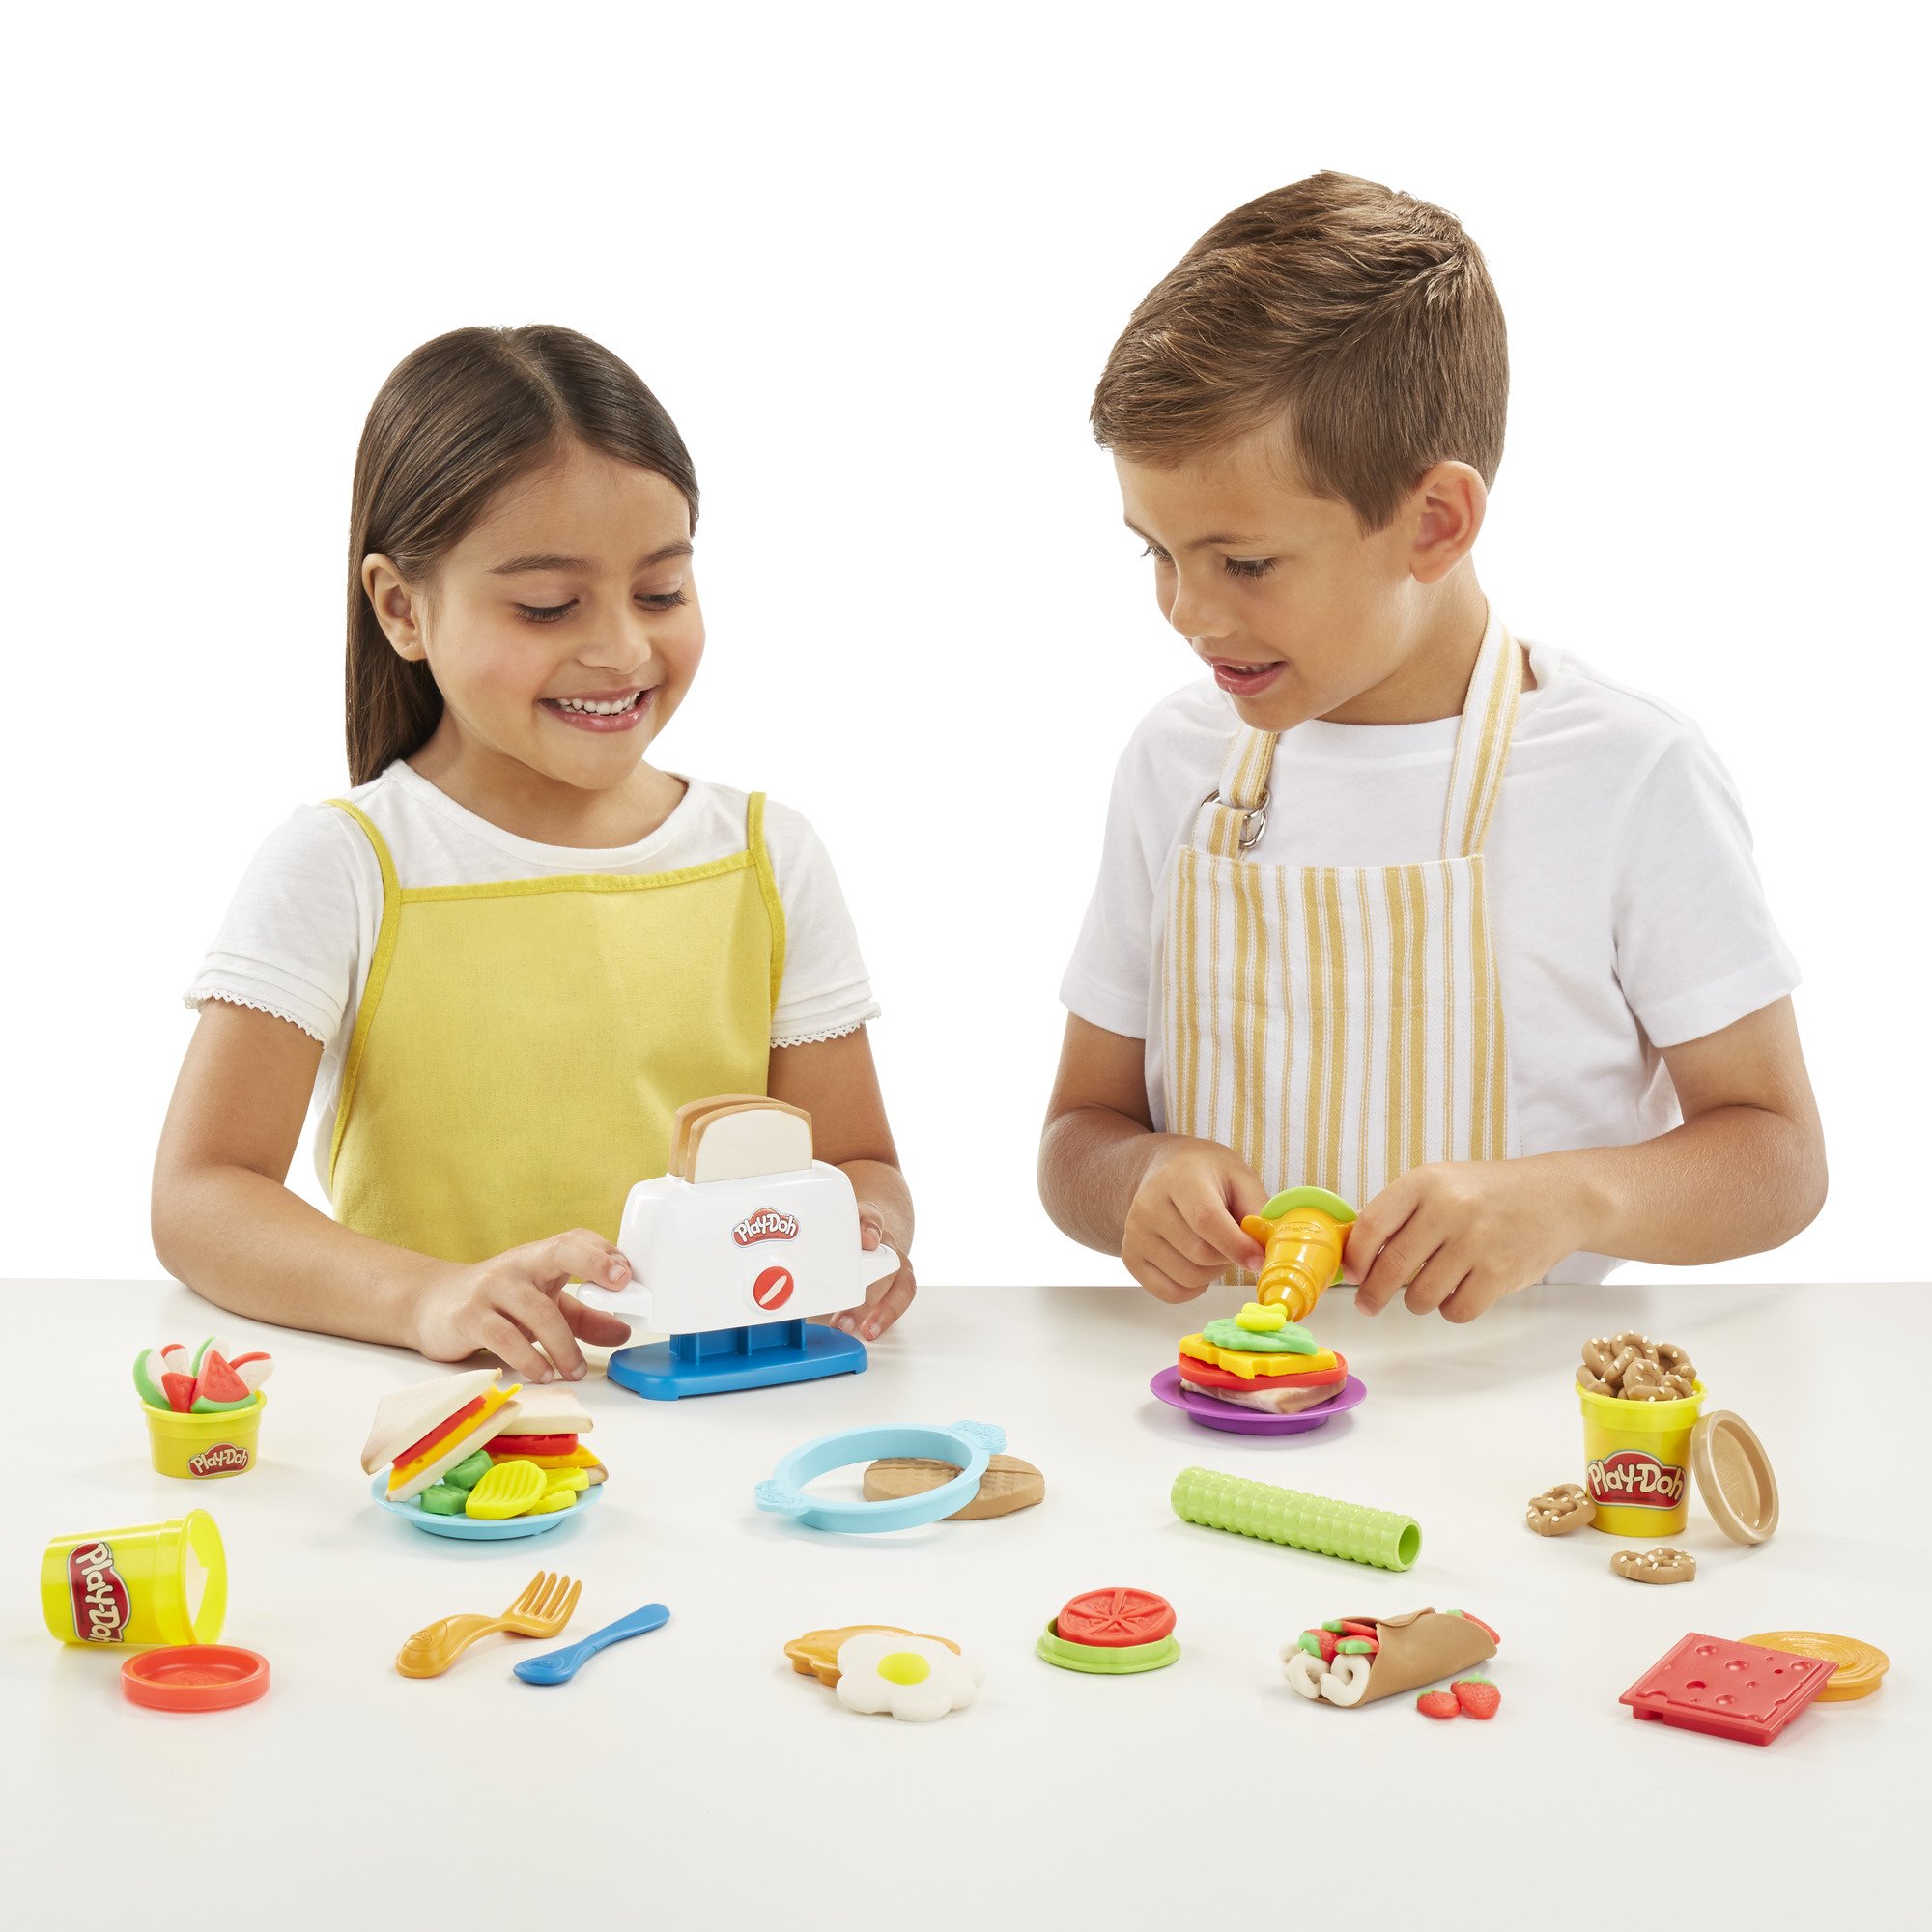 Play-Doh Kitchen Creations Toaster Creations Play Set, 6 Cans (10 oz) - image 3 of 6